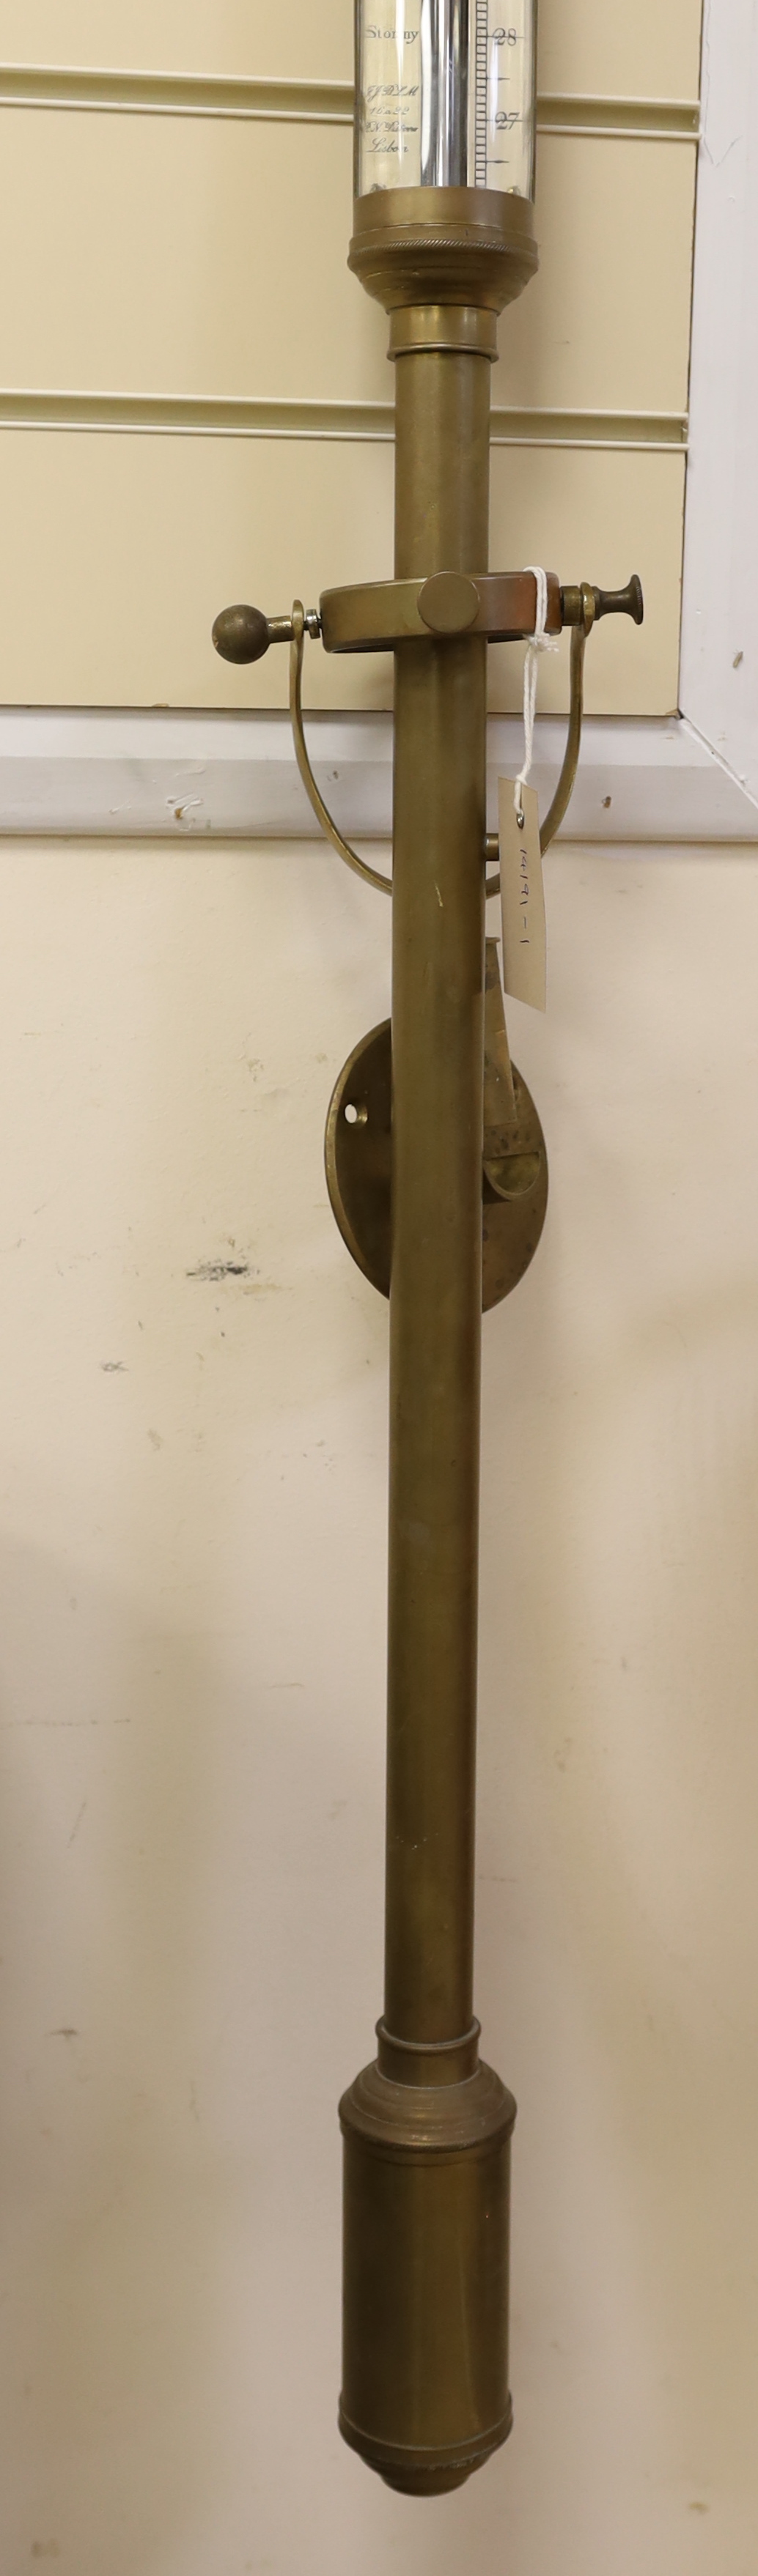 An early twentieth century marine barometer with a brass body mounted on a gimbal by R.N. Desterre, Lisbon, 93cm